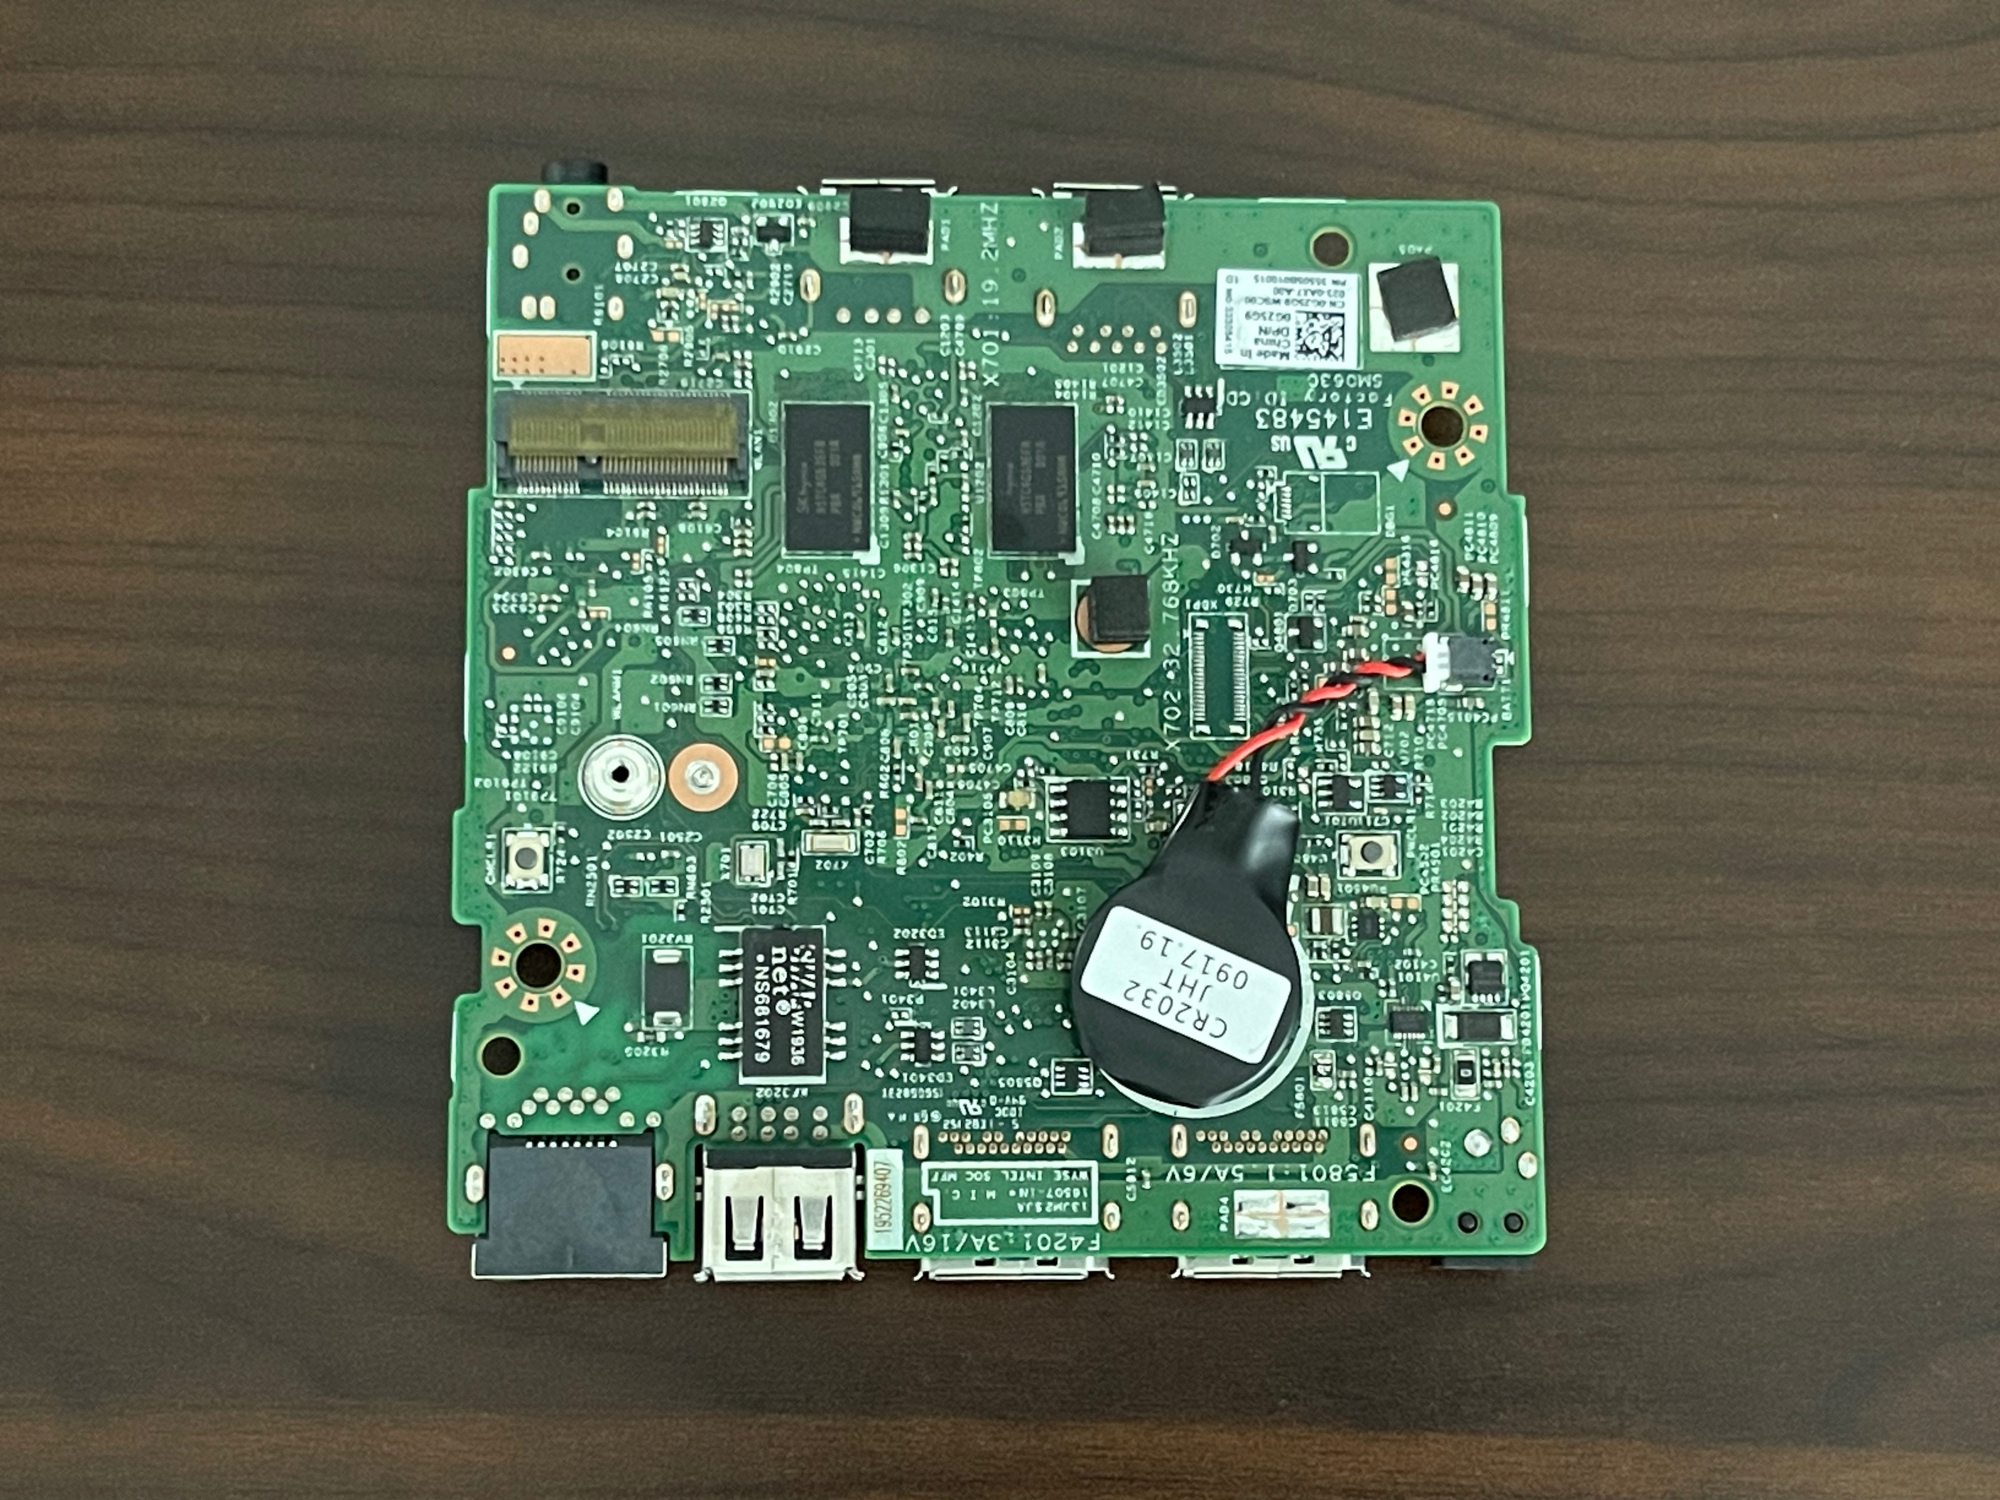 Dell Wyse 3040 Thin Client - Motherboard (Bottom). The M.2 slot can be seen on the left side of the motherboard.